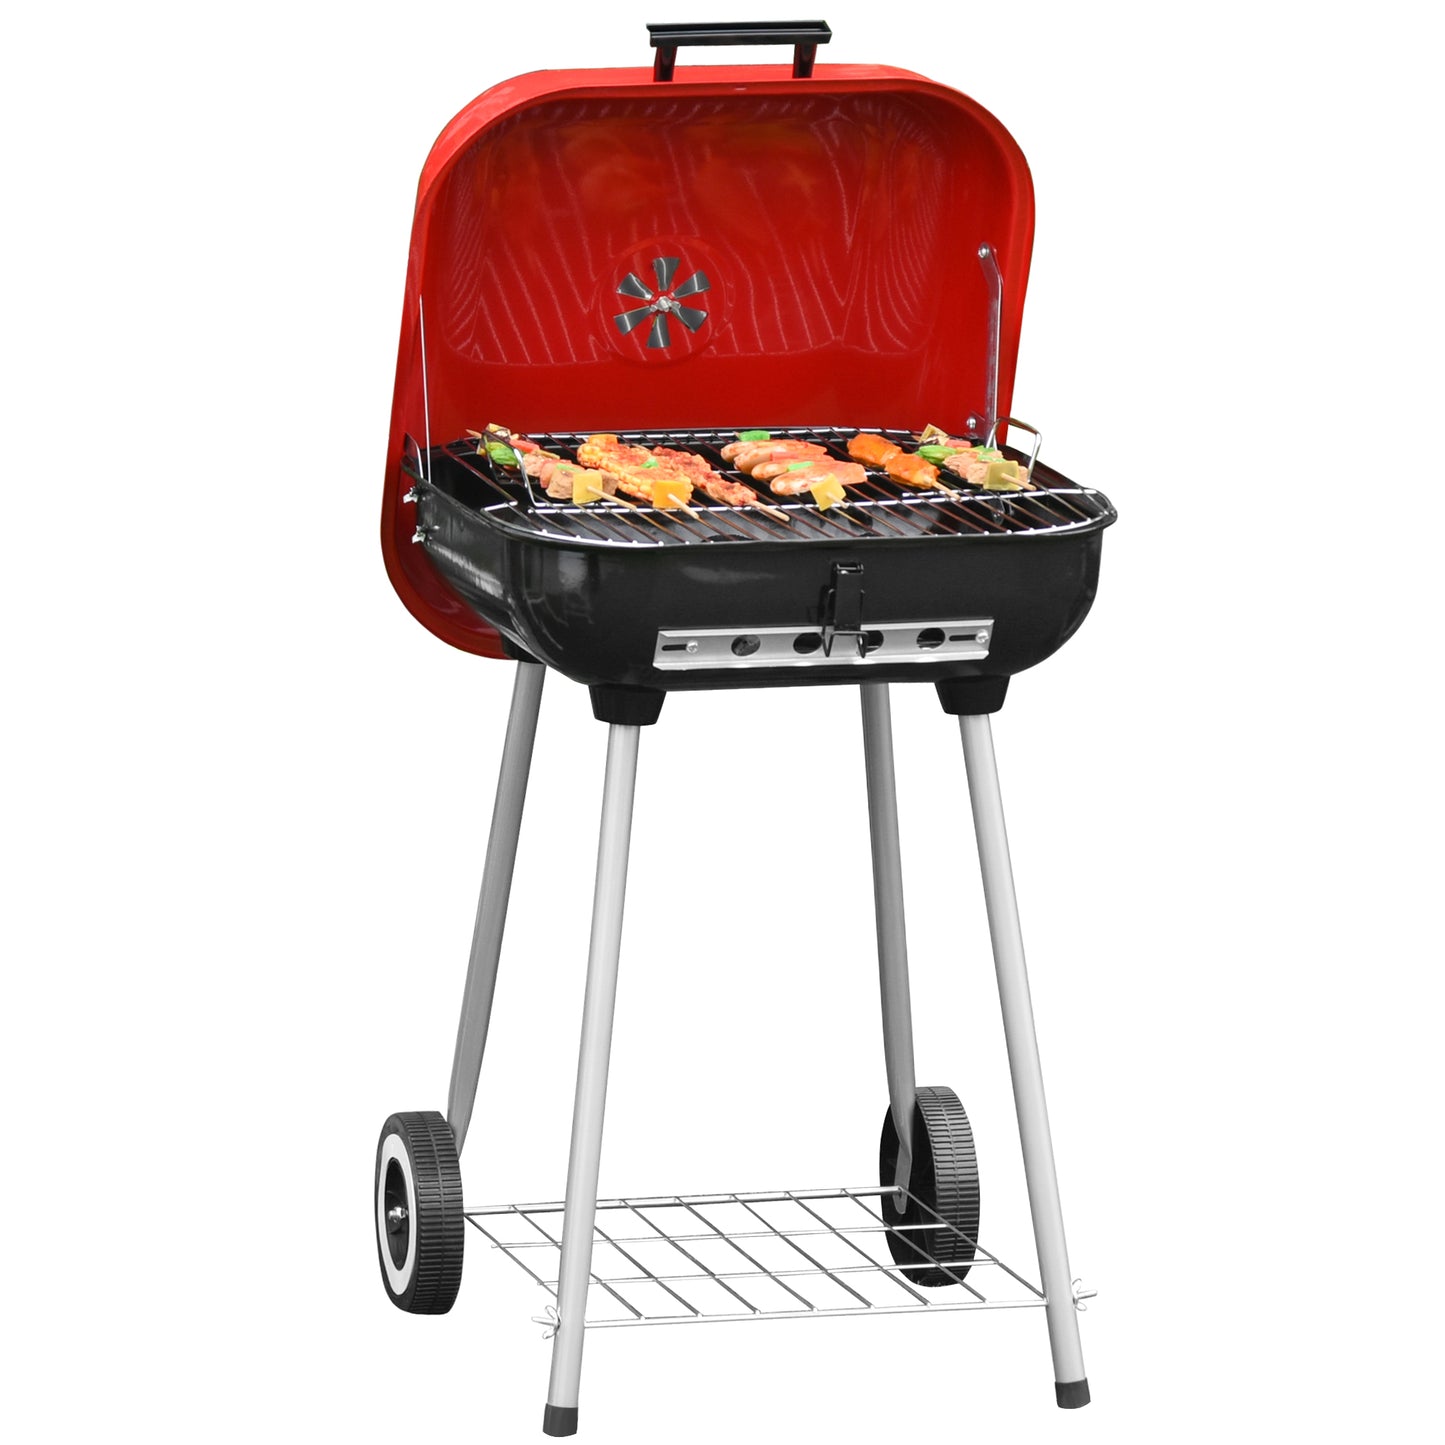 Outsunny Charcoal Barbecue Grill W/2 Wheels, 45x47.5x70 cm-Red/Black